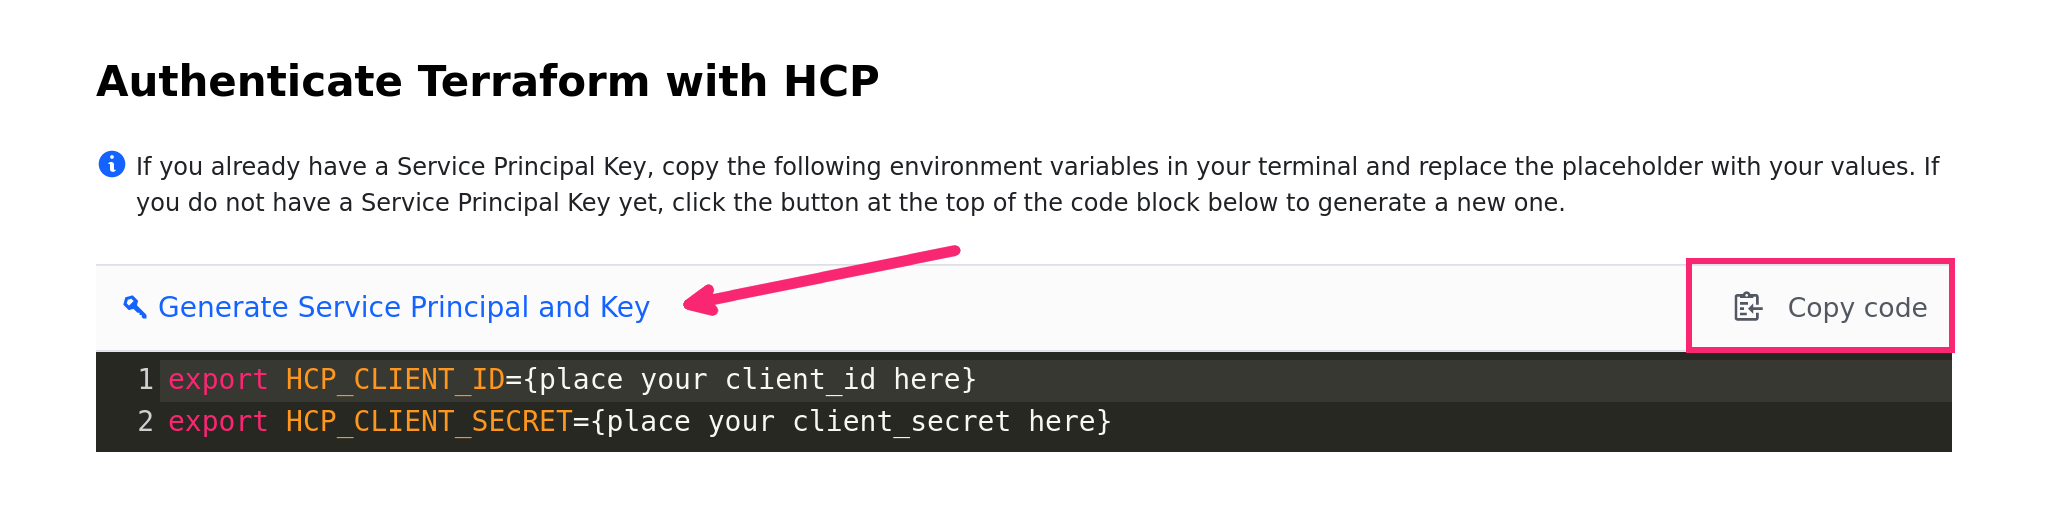 HCP UI Consul - Deploy with Terraform - Download TF code for ECS